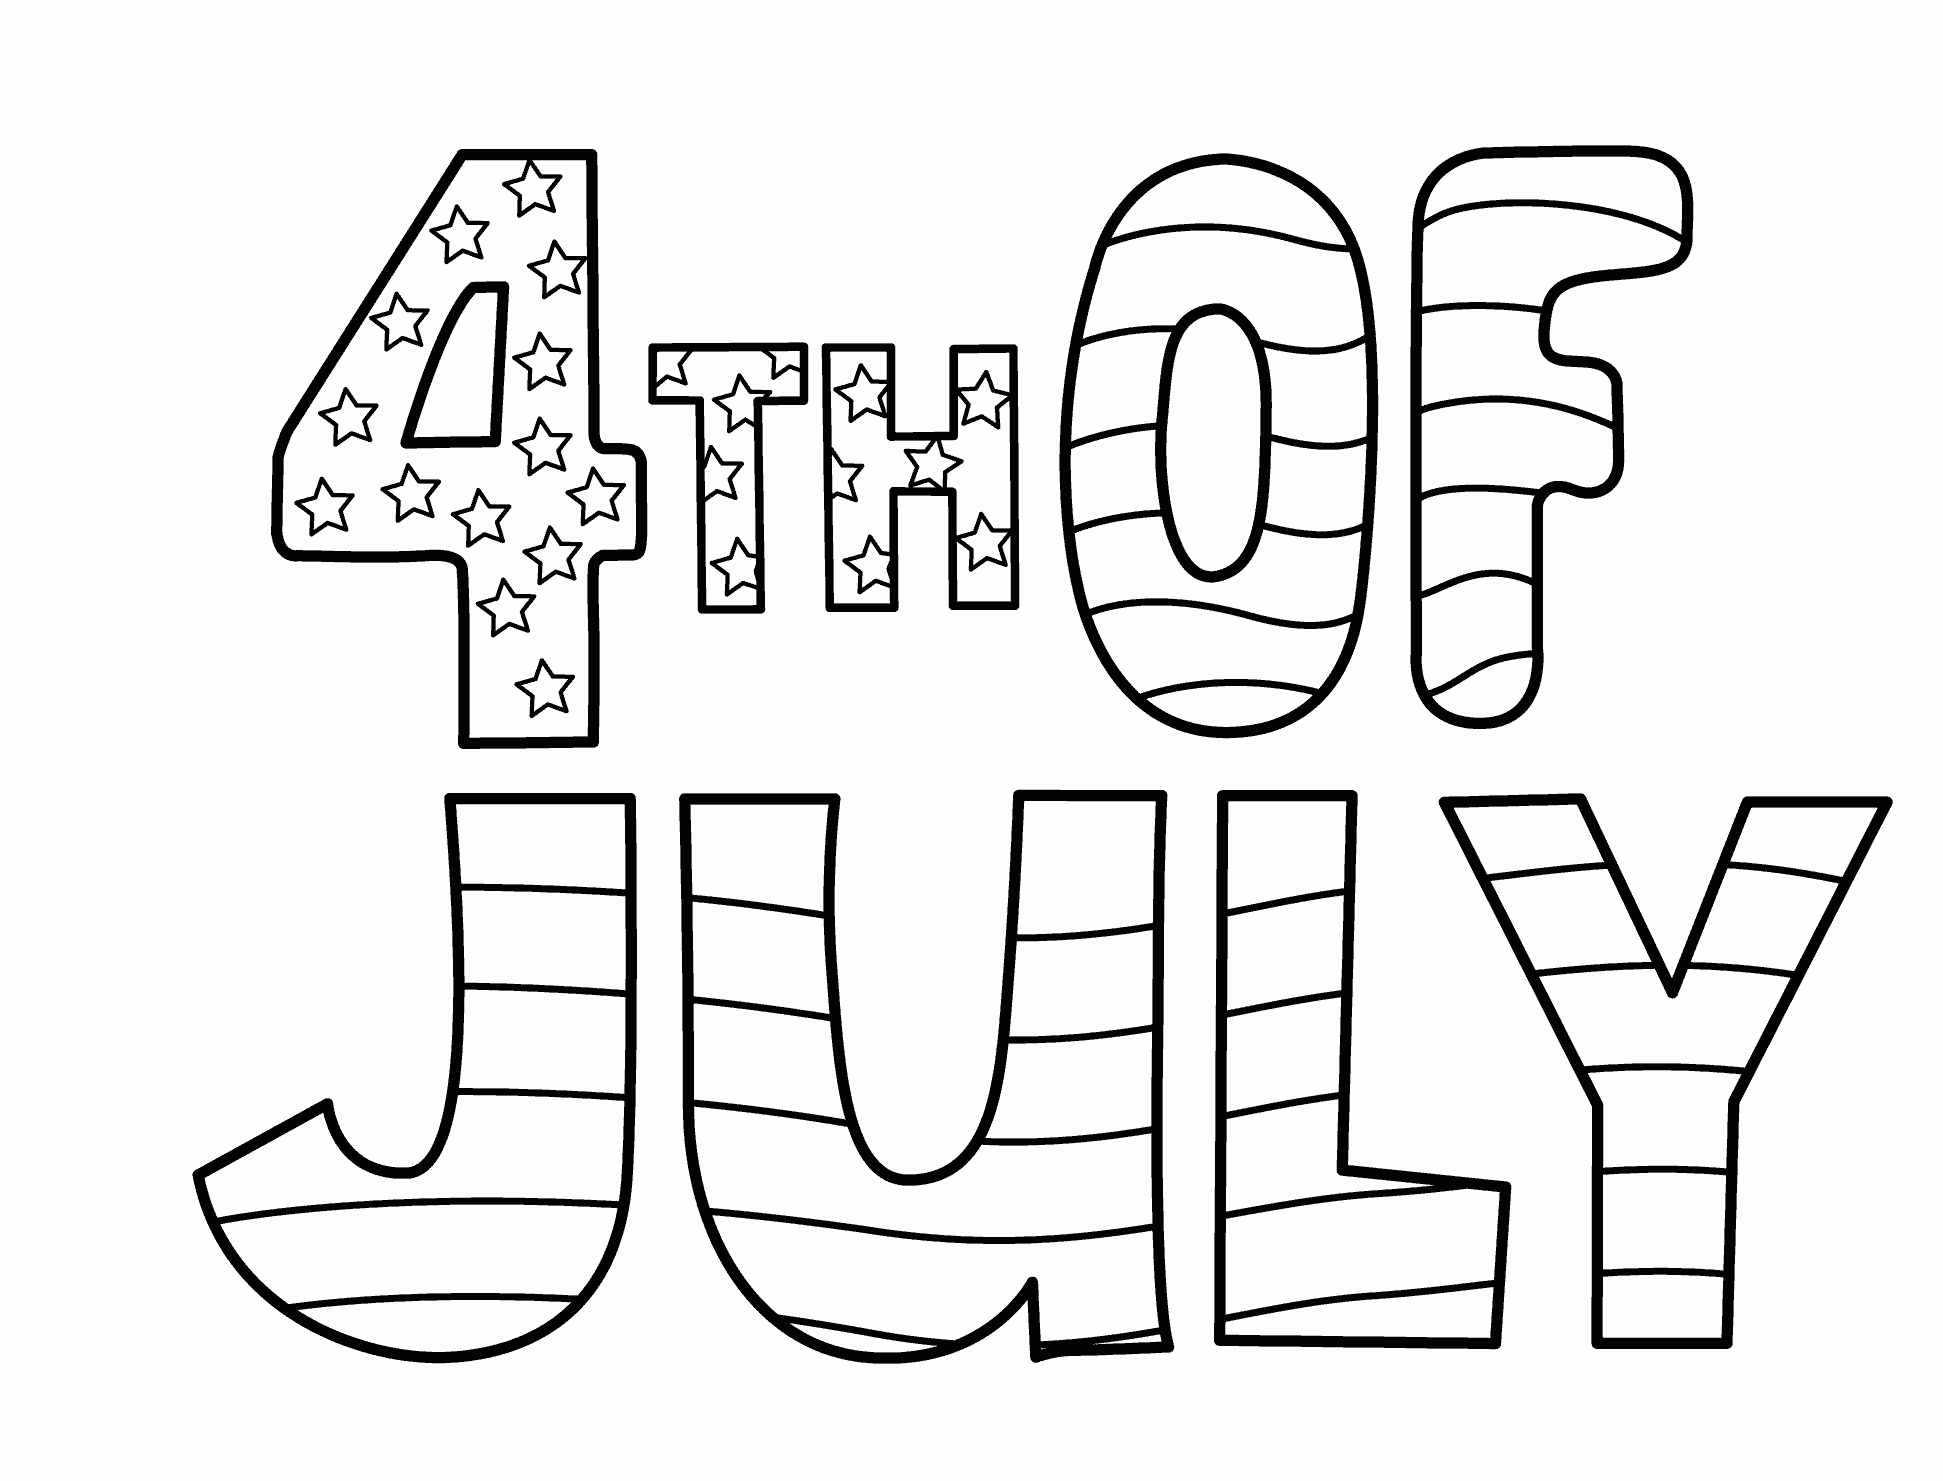 Soulmetalpodcast: Forth Of July Coloring Pages